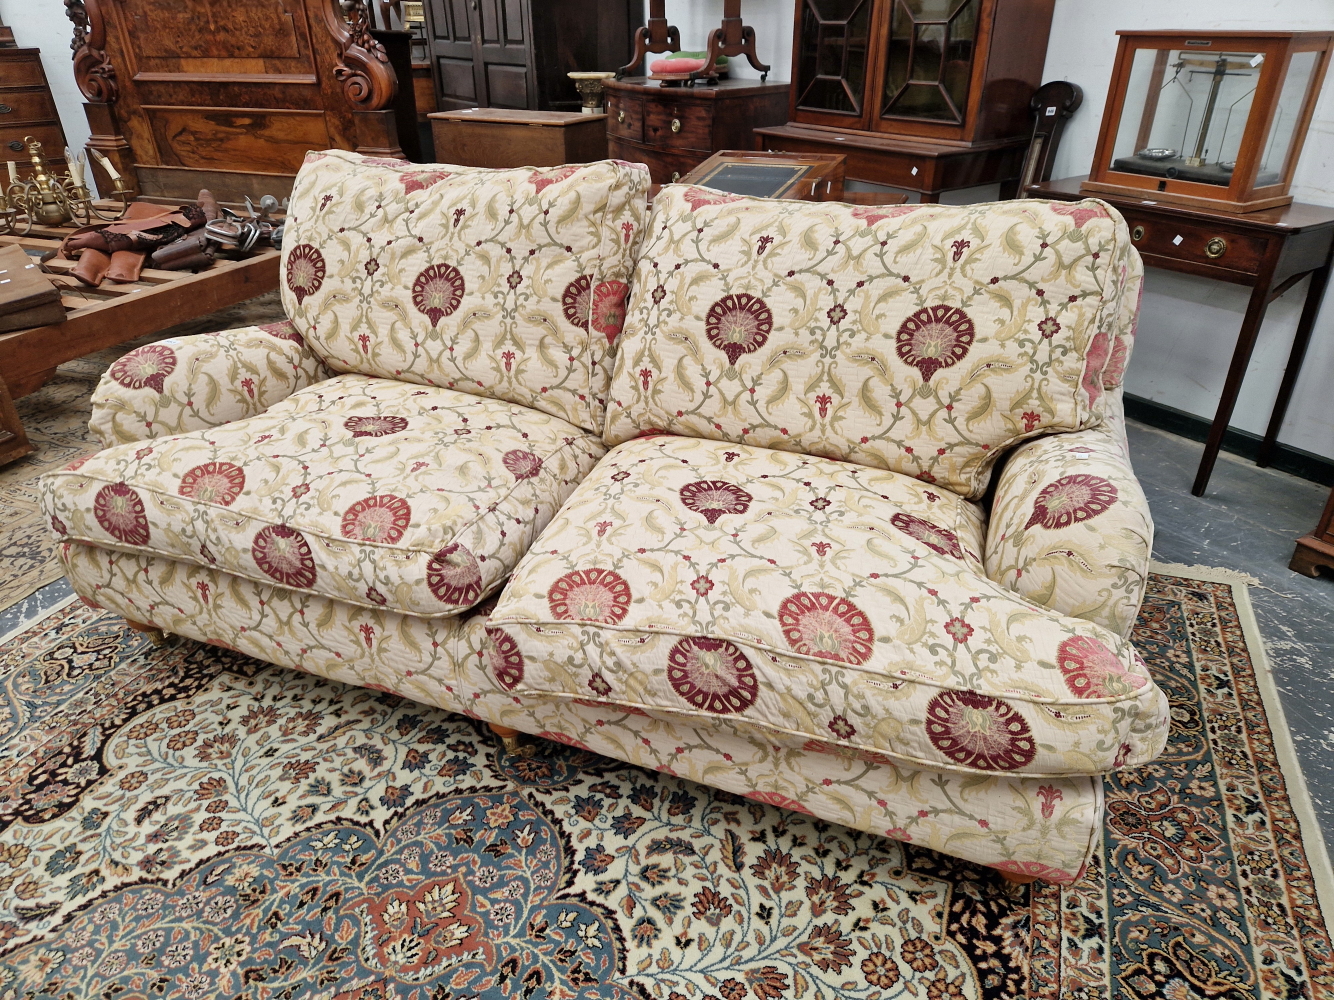 A TWO SEAT SOFA WITH BRASS CASTER FEET AND UPHOLSTERED IN SUSANI STYLE PRINTED MATERIAL - Image 4 of 6